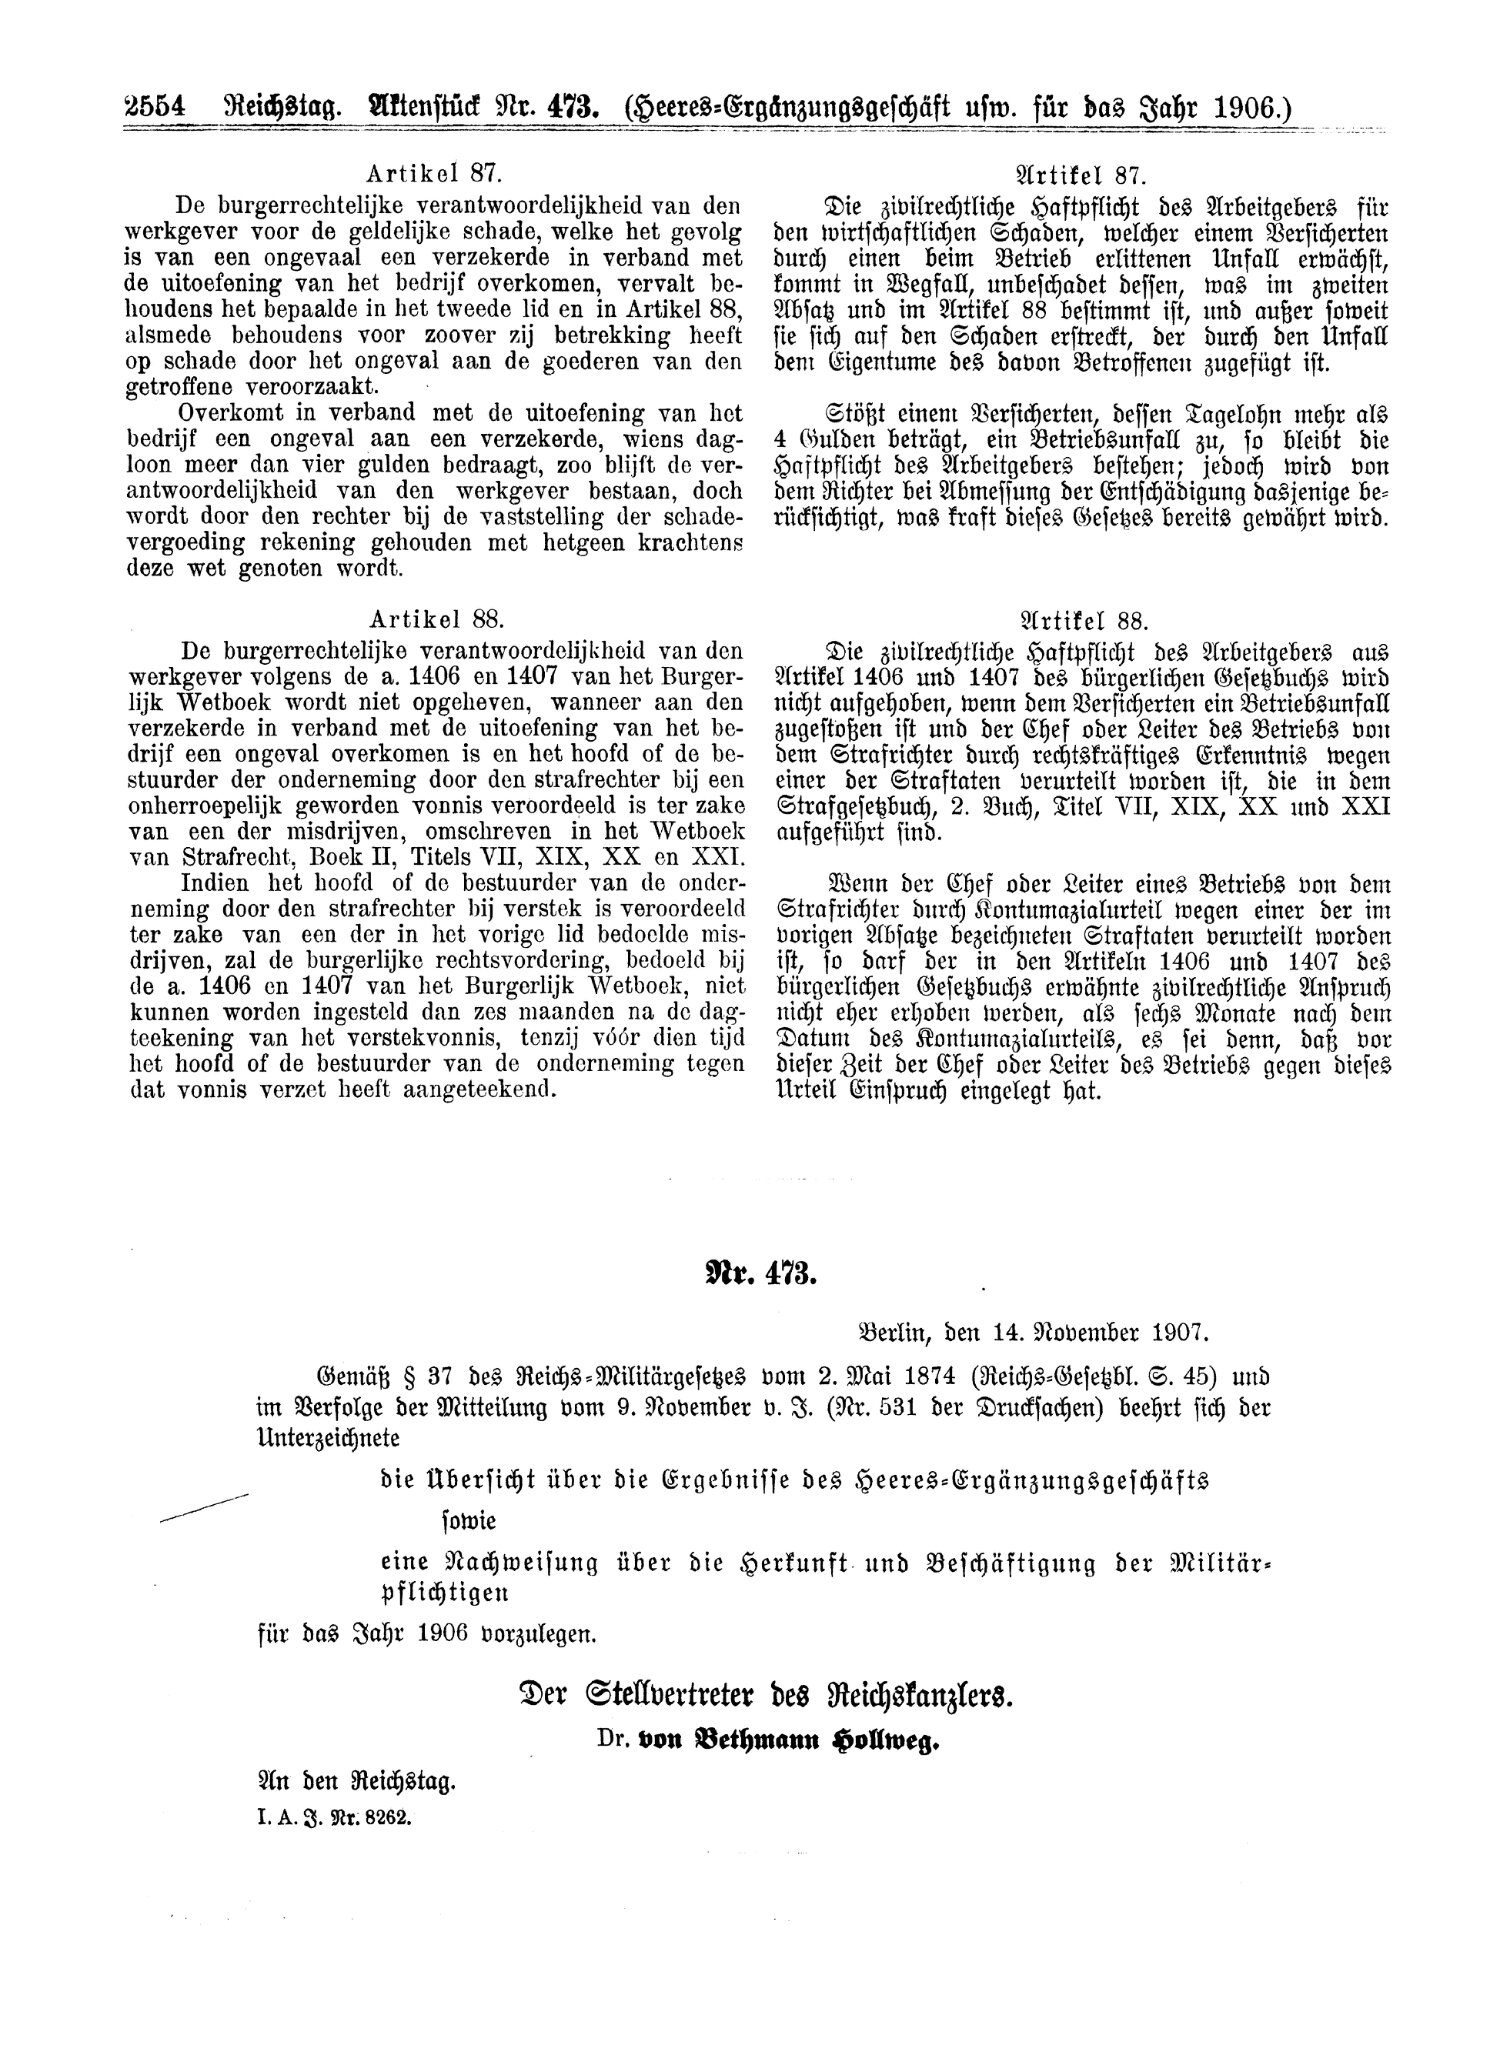 Scan of page 2554